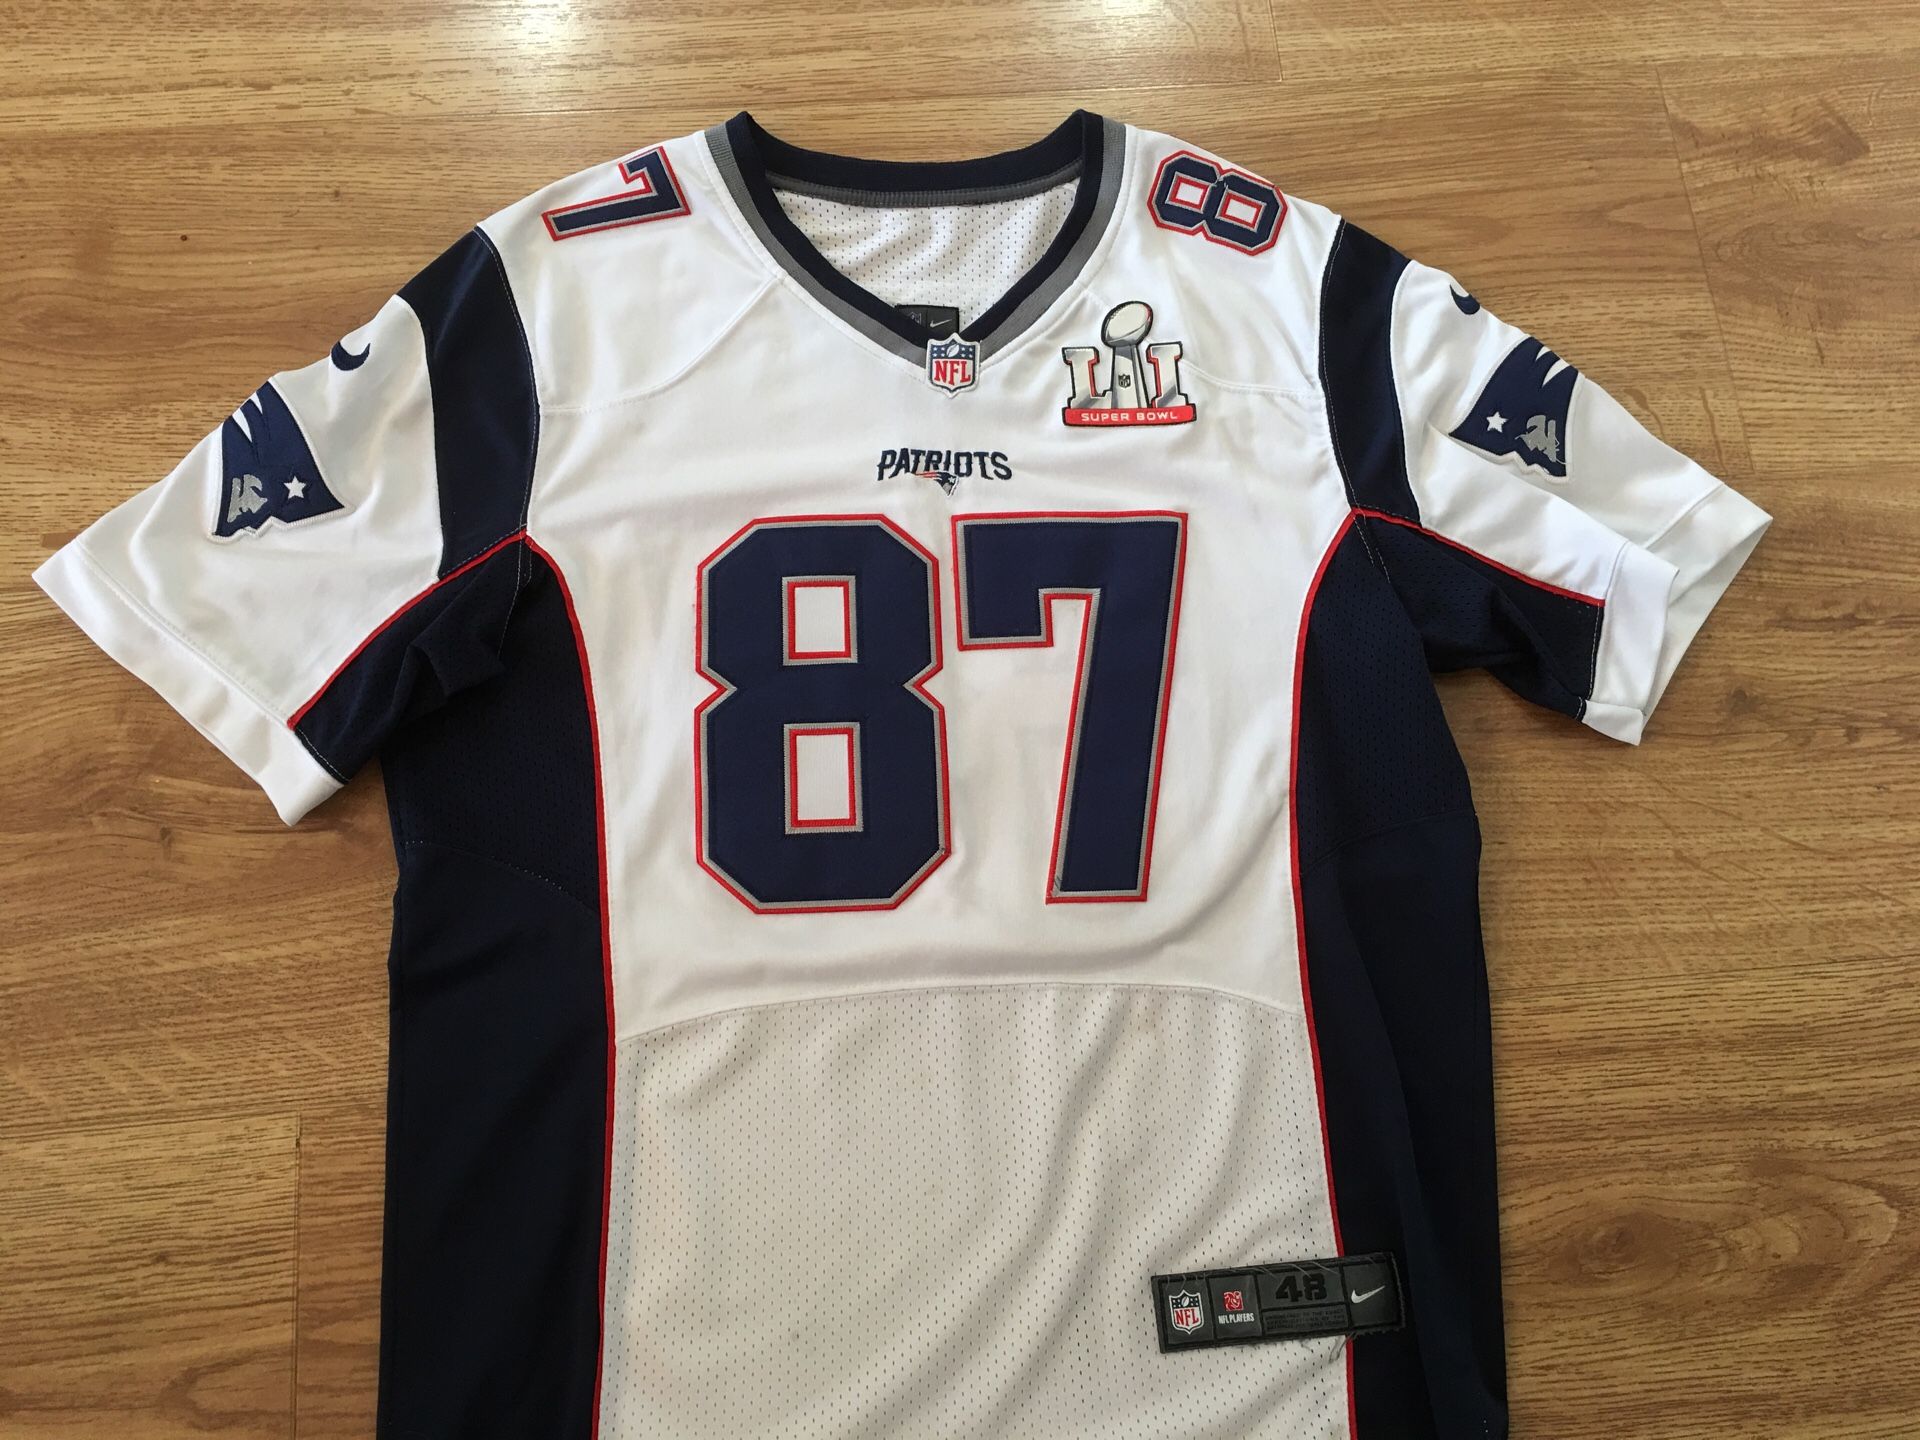 New England Patriots Rob Gronkowski Super Bowl Jersey with SB patch sewn on. Size 48 XL.